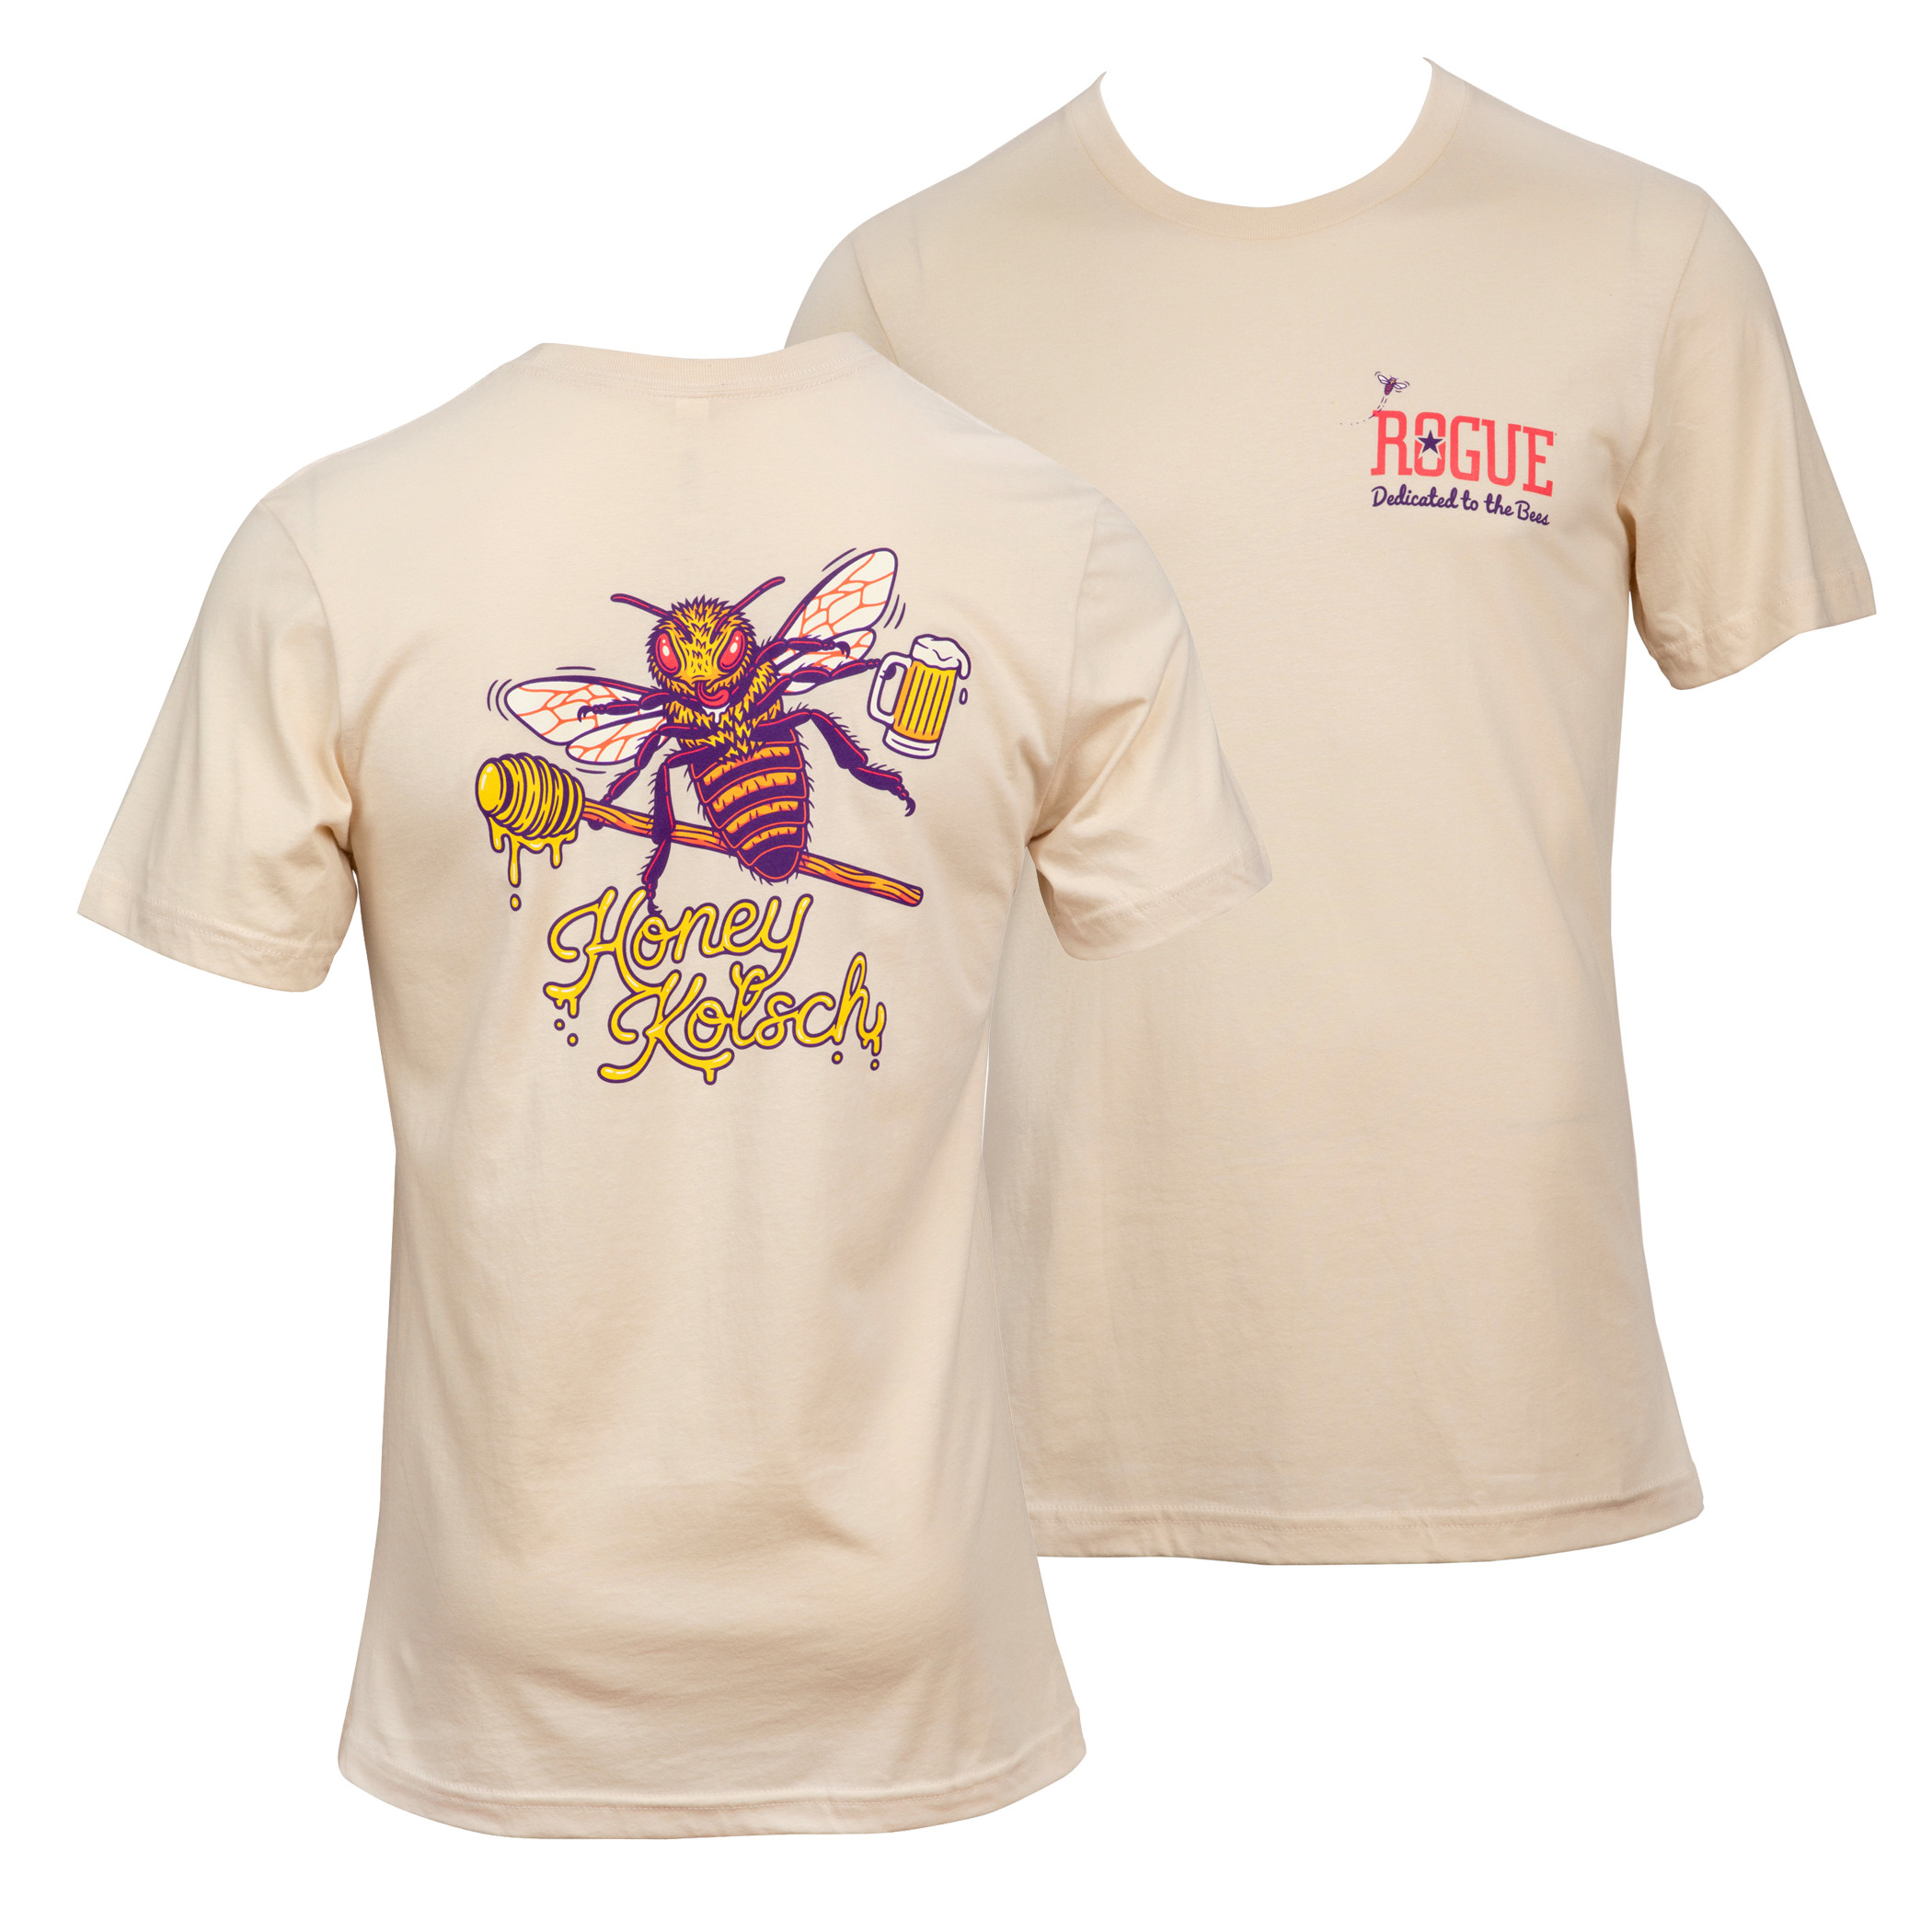 Honey Kolsch Rogue Beer Dedicated To The Bees Front and Back T-Shirt